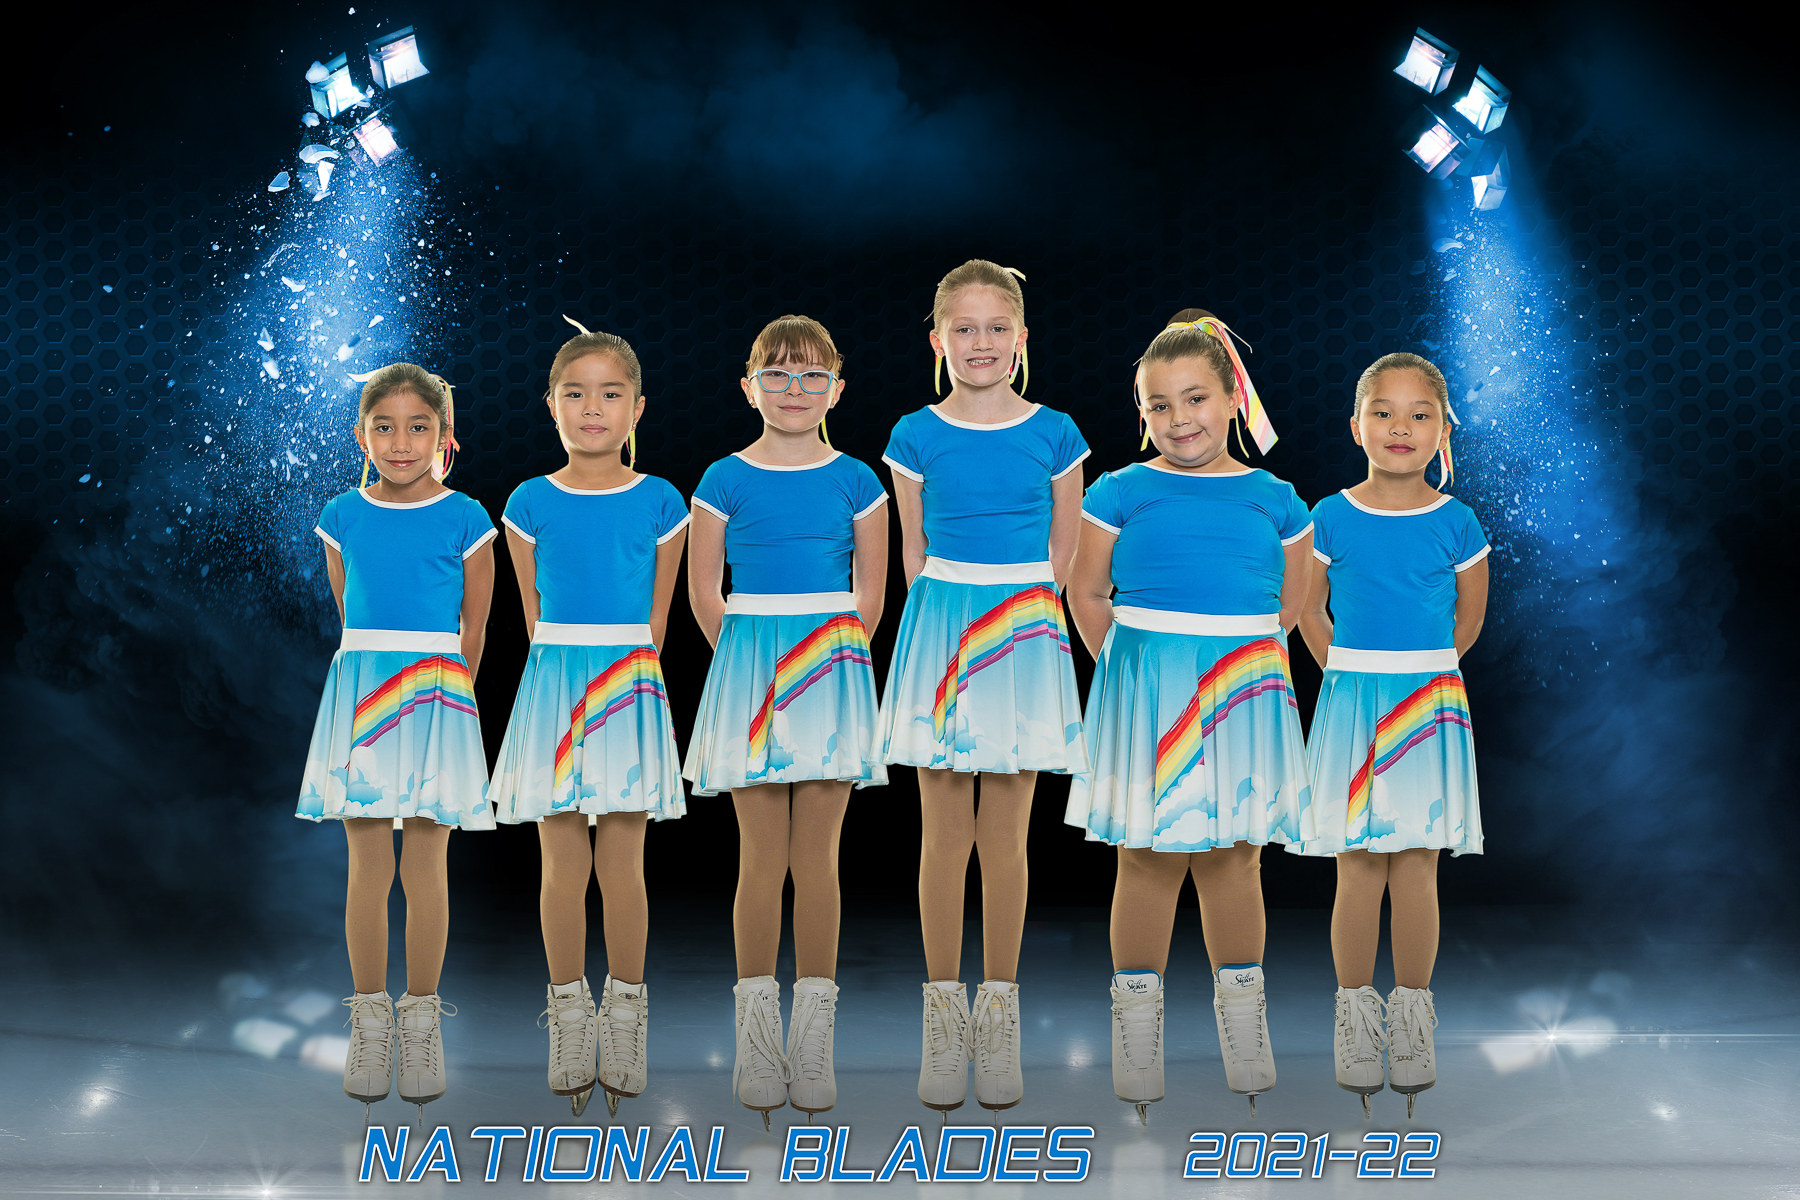 Six young girls in blue top and light blue with rainbow dress in figure skates.